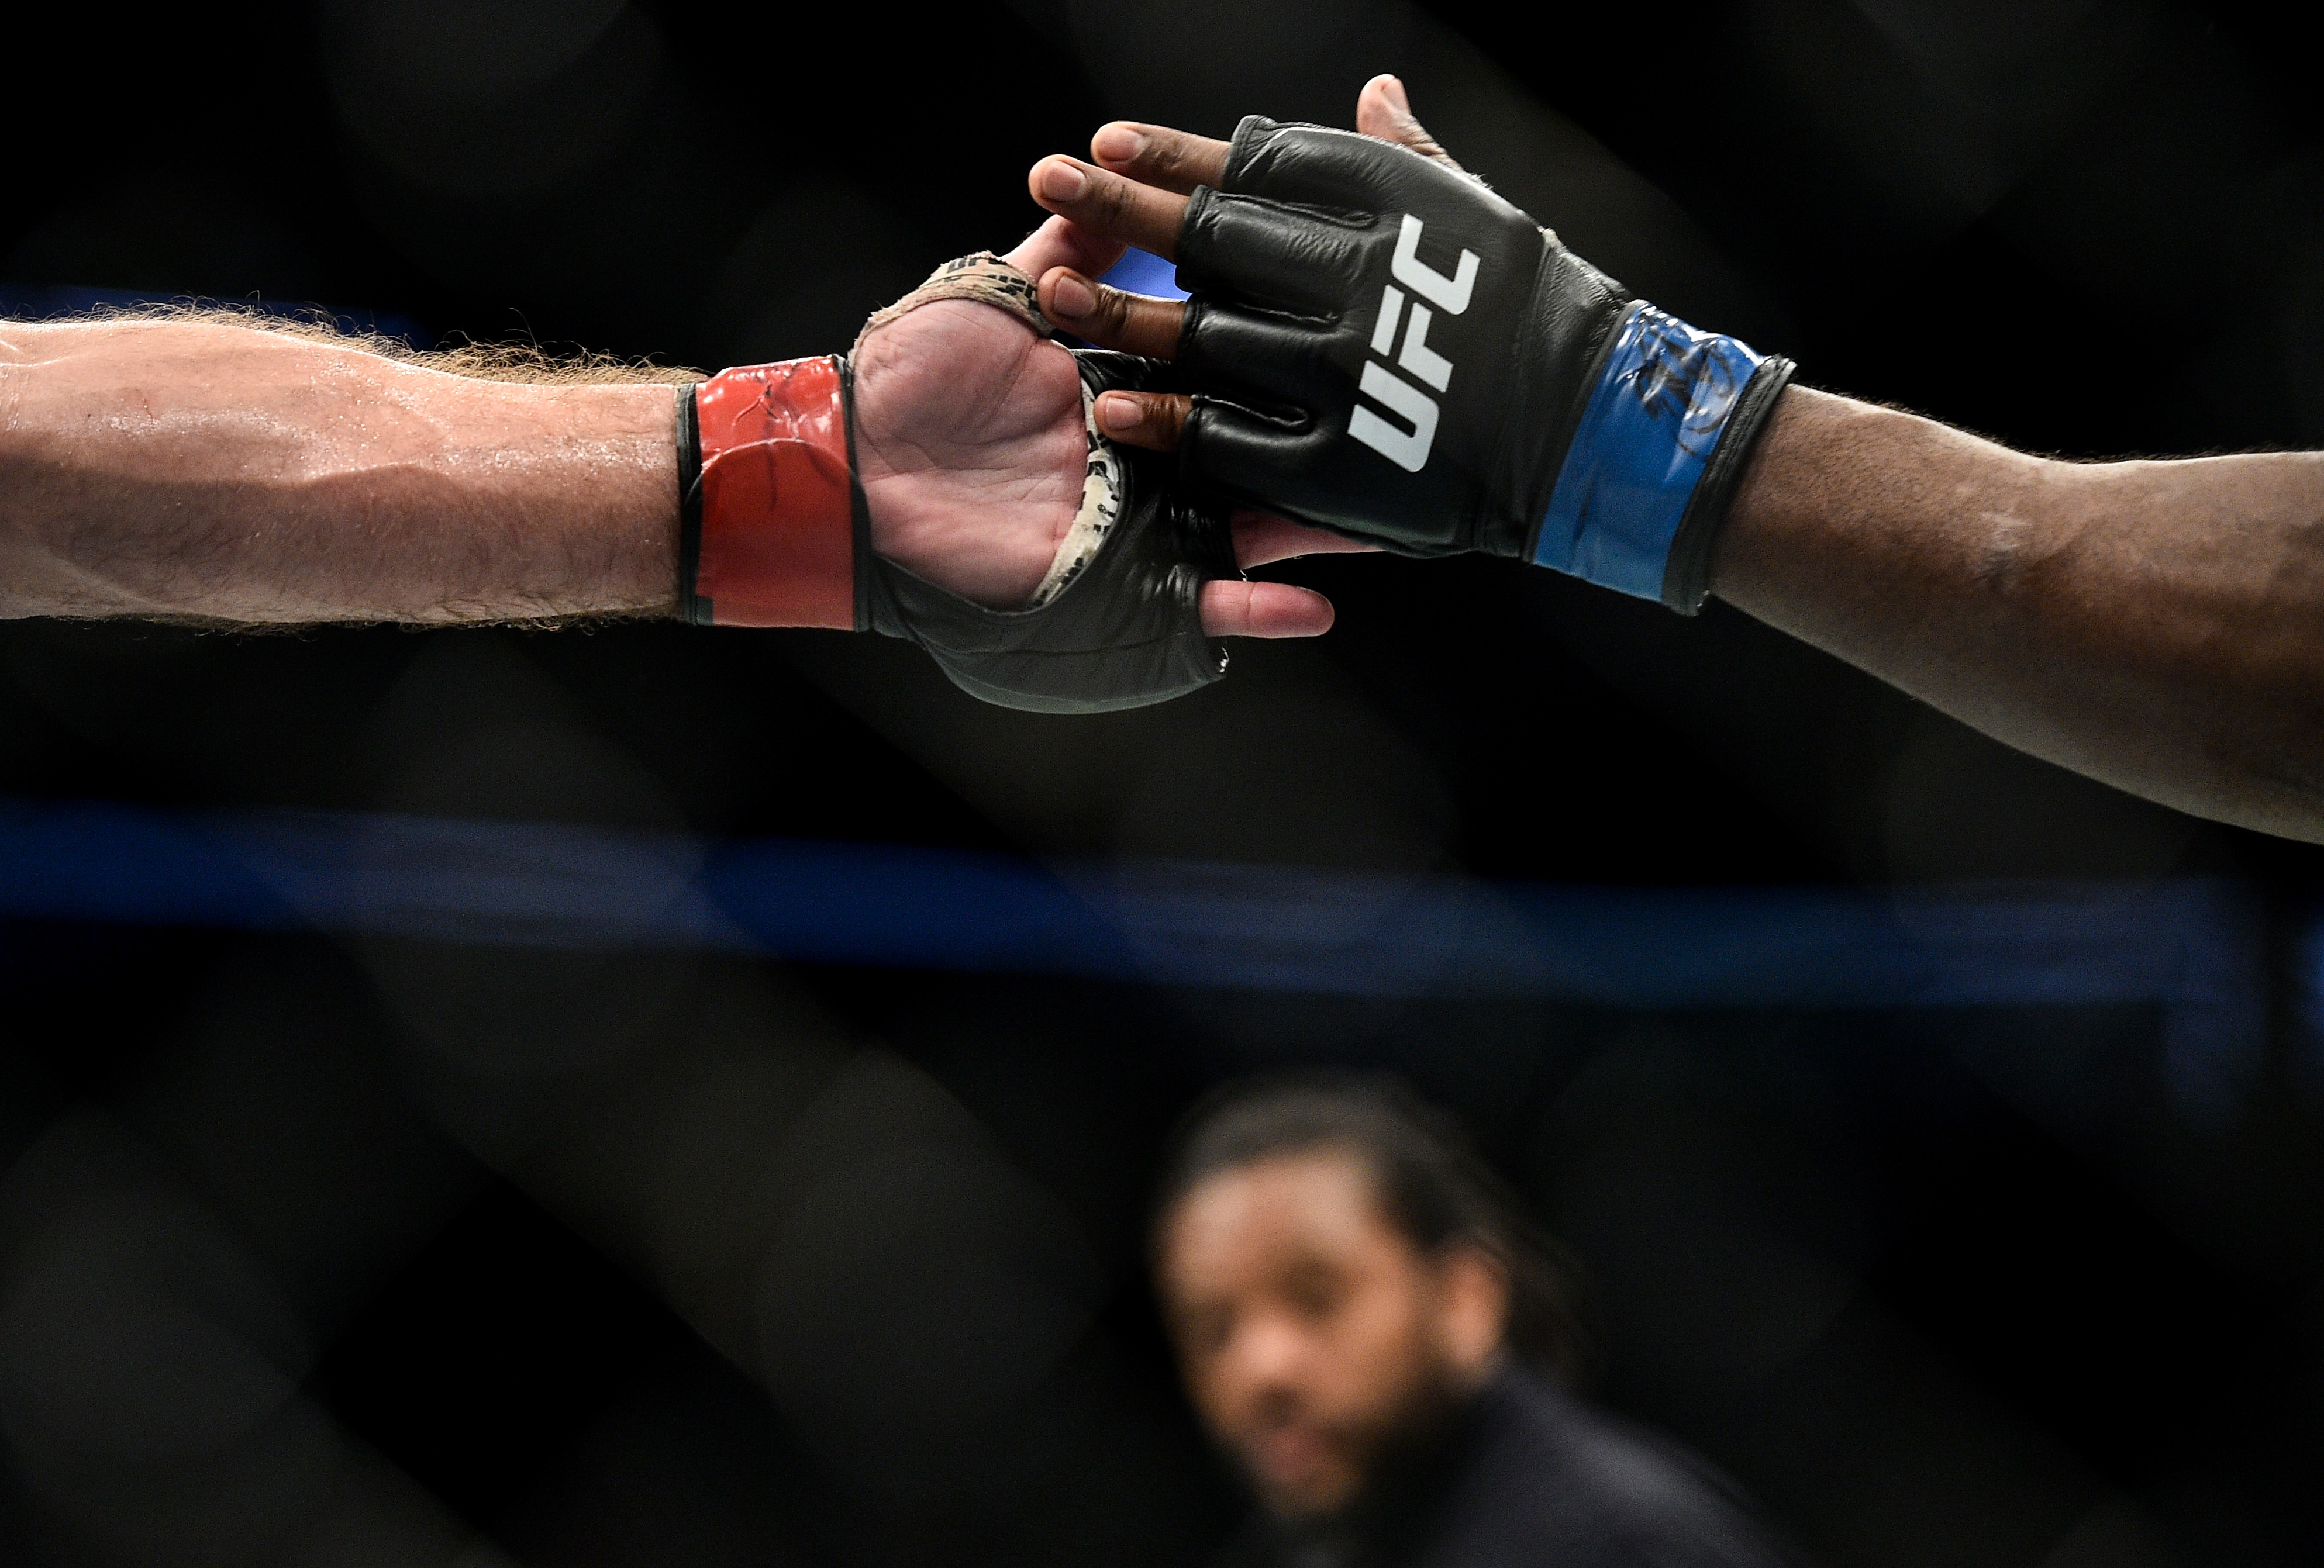 How to Watch UFC Fight Night - Luque vs